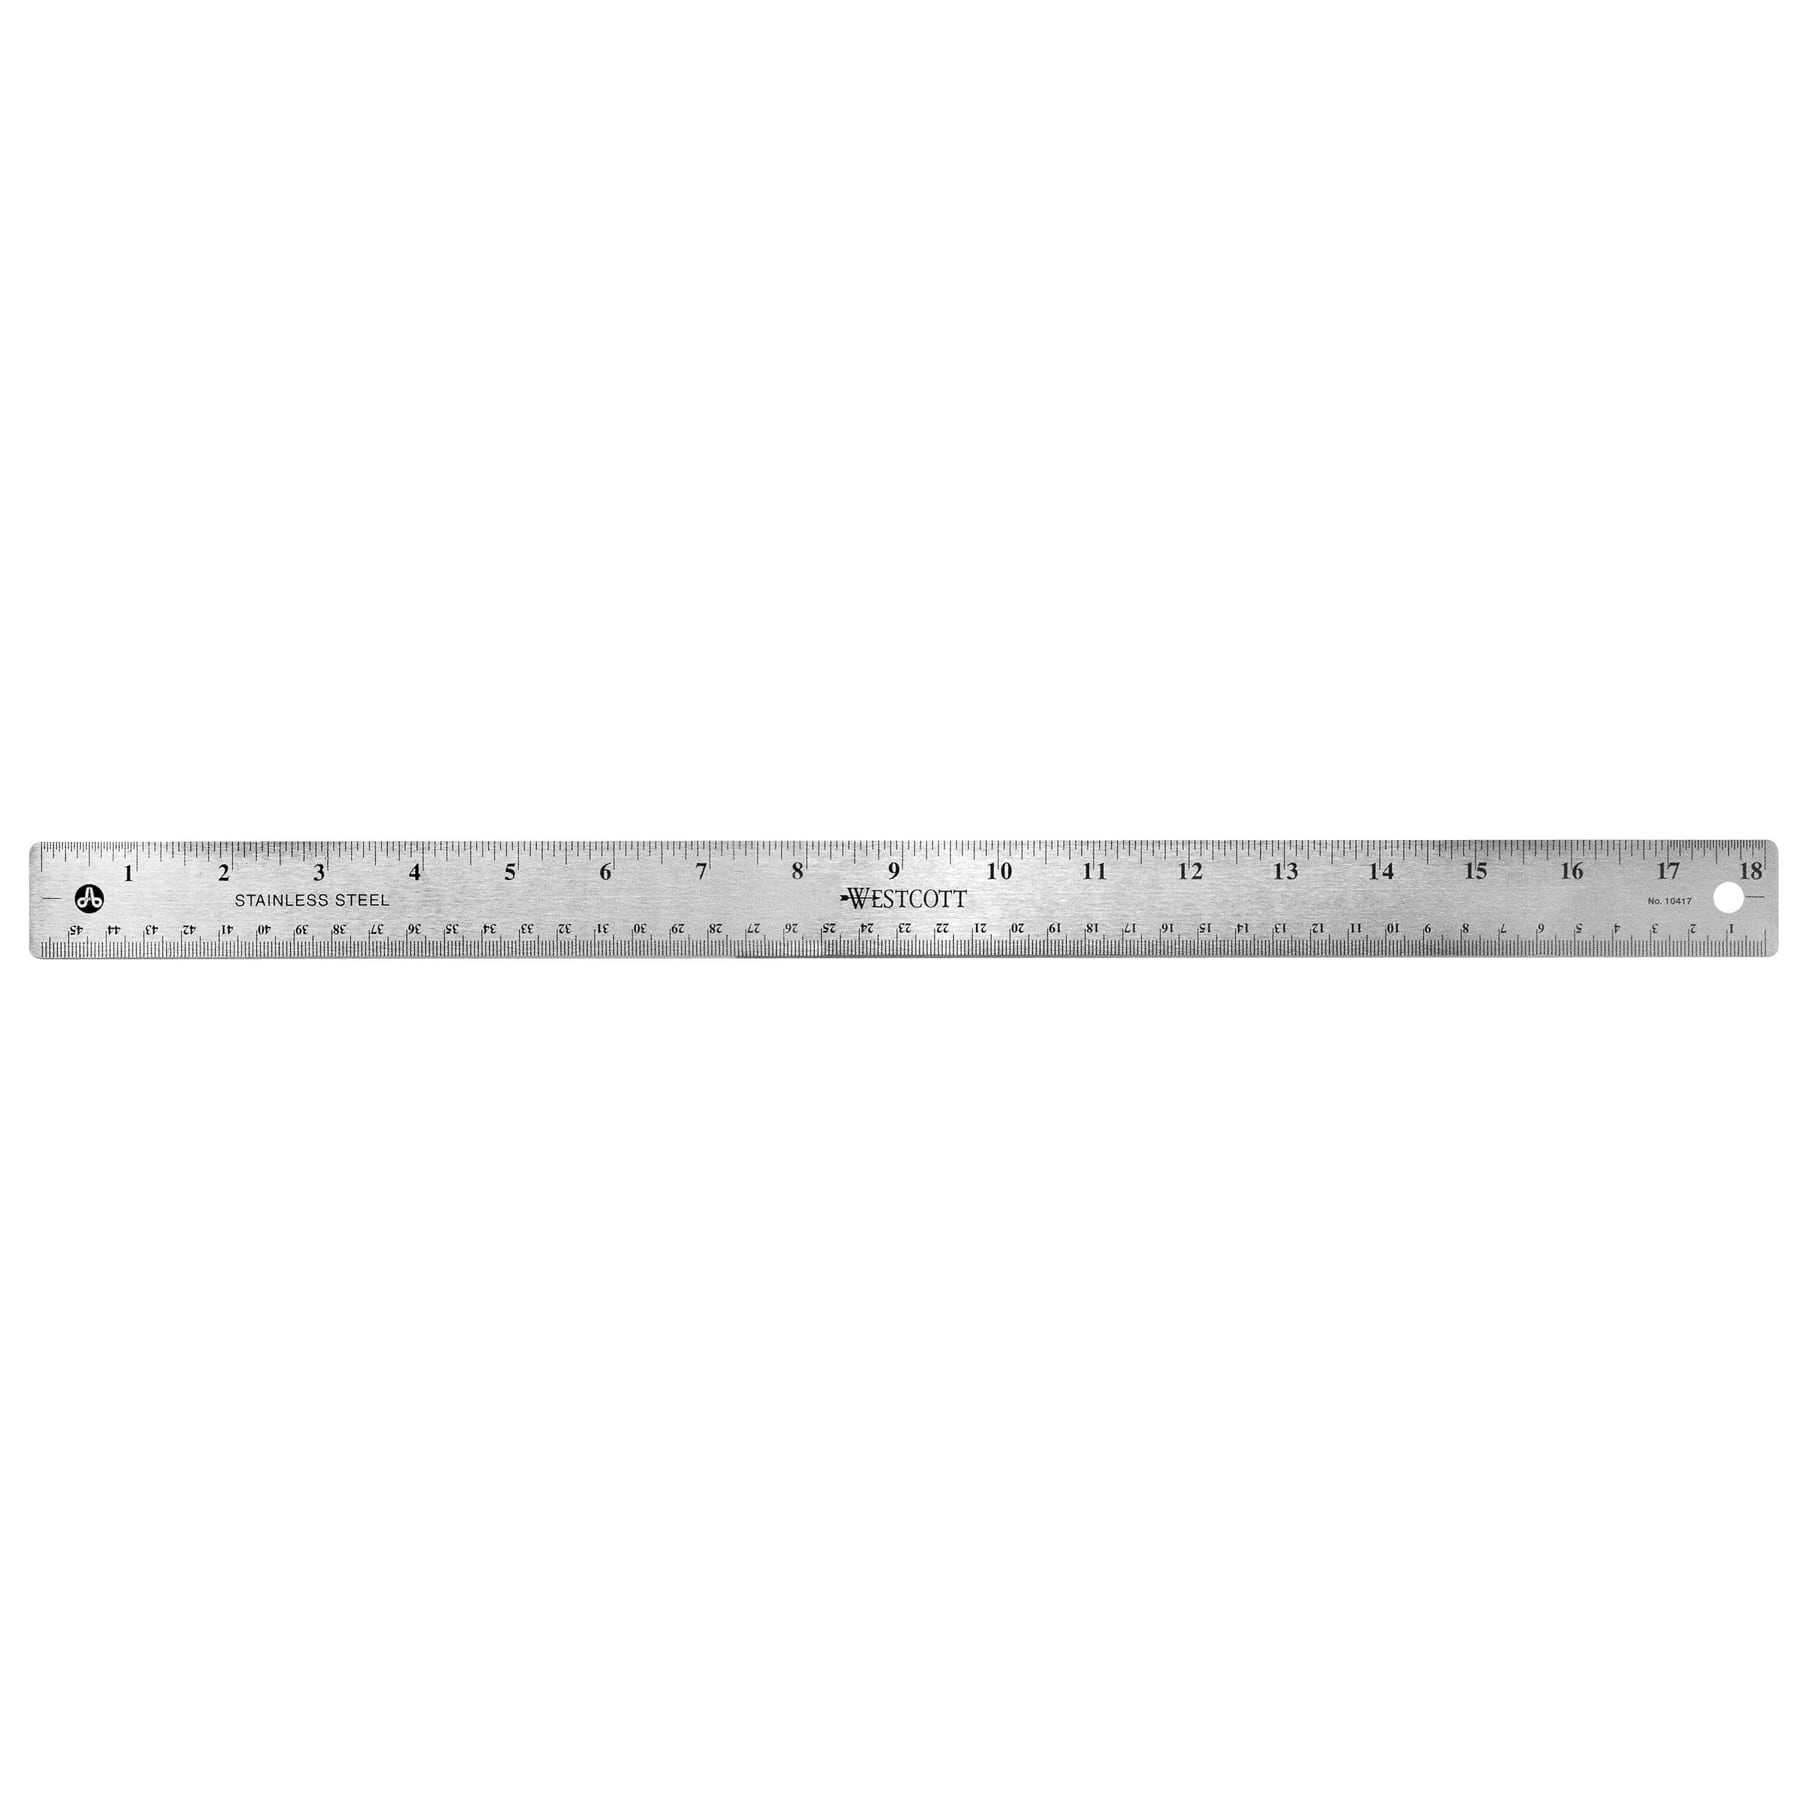 Photo Documentation - Scales - Nist Certified Steel Ruler - A-6144